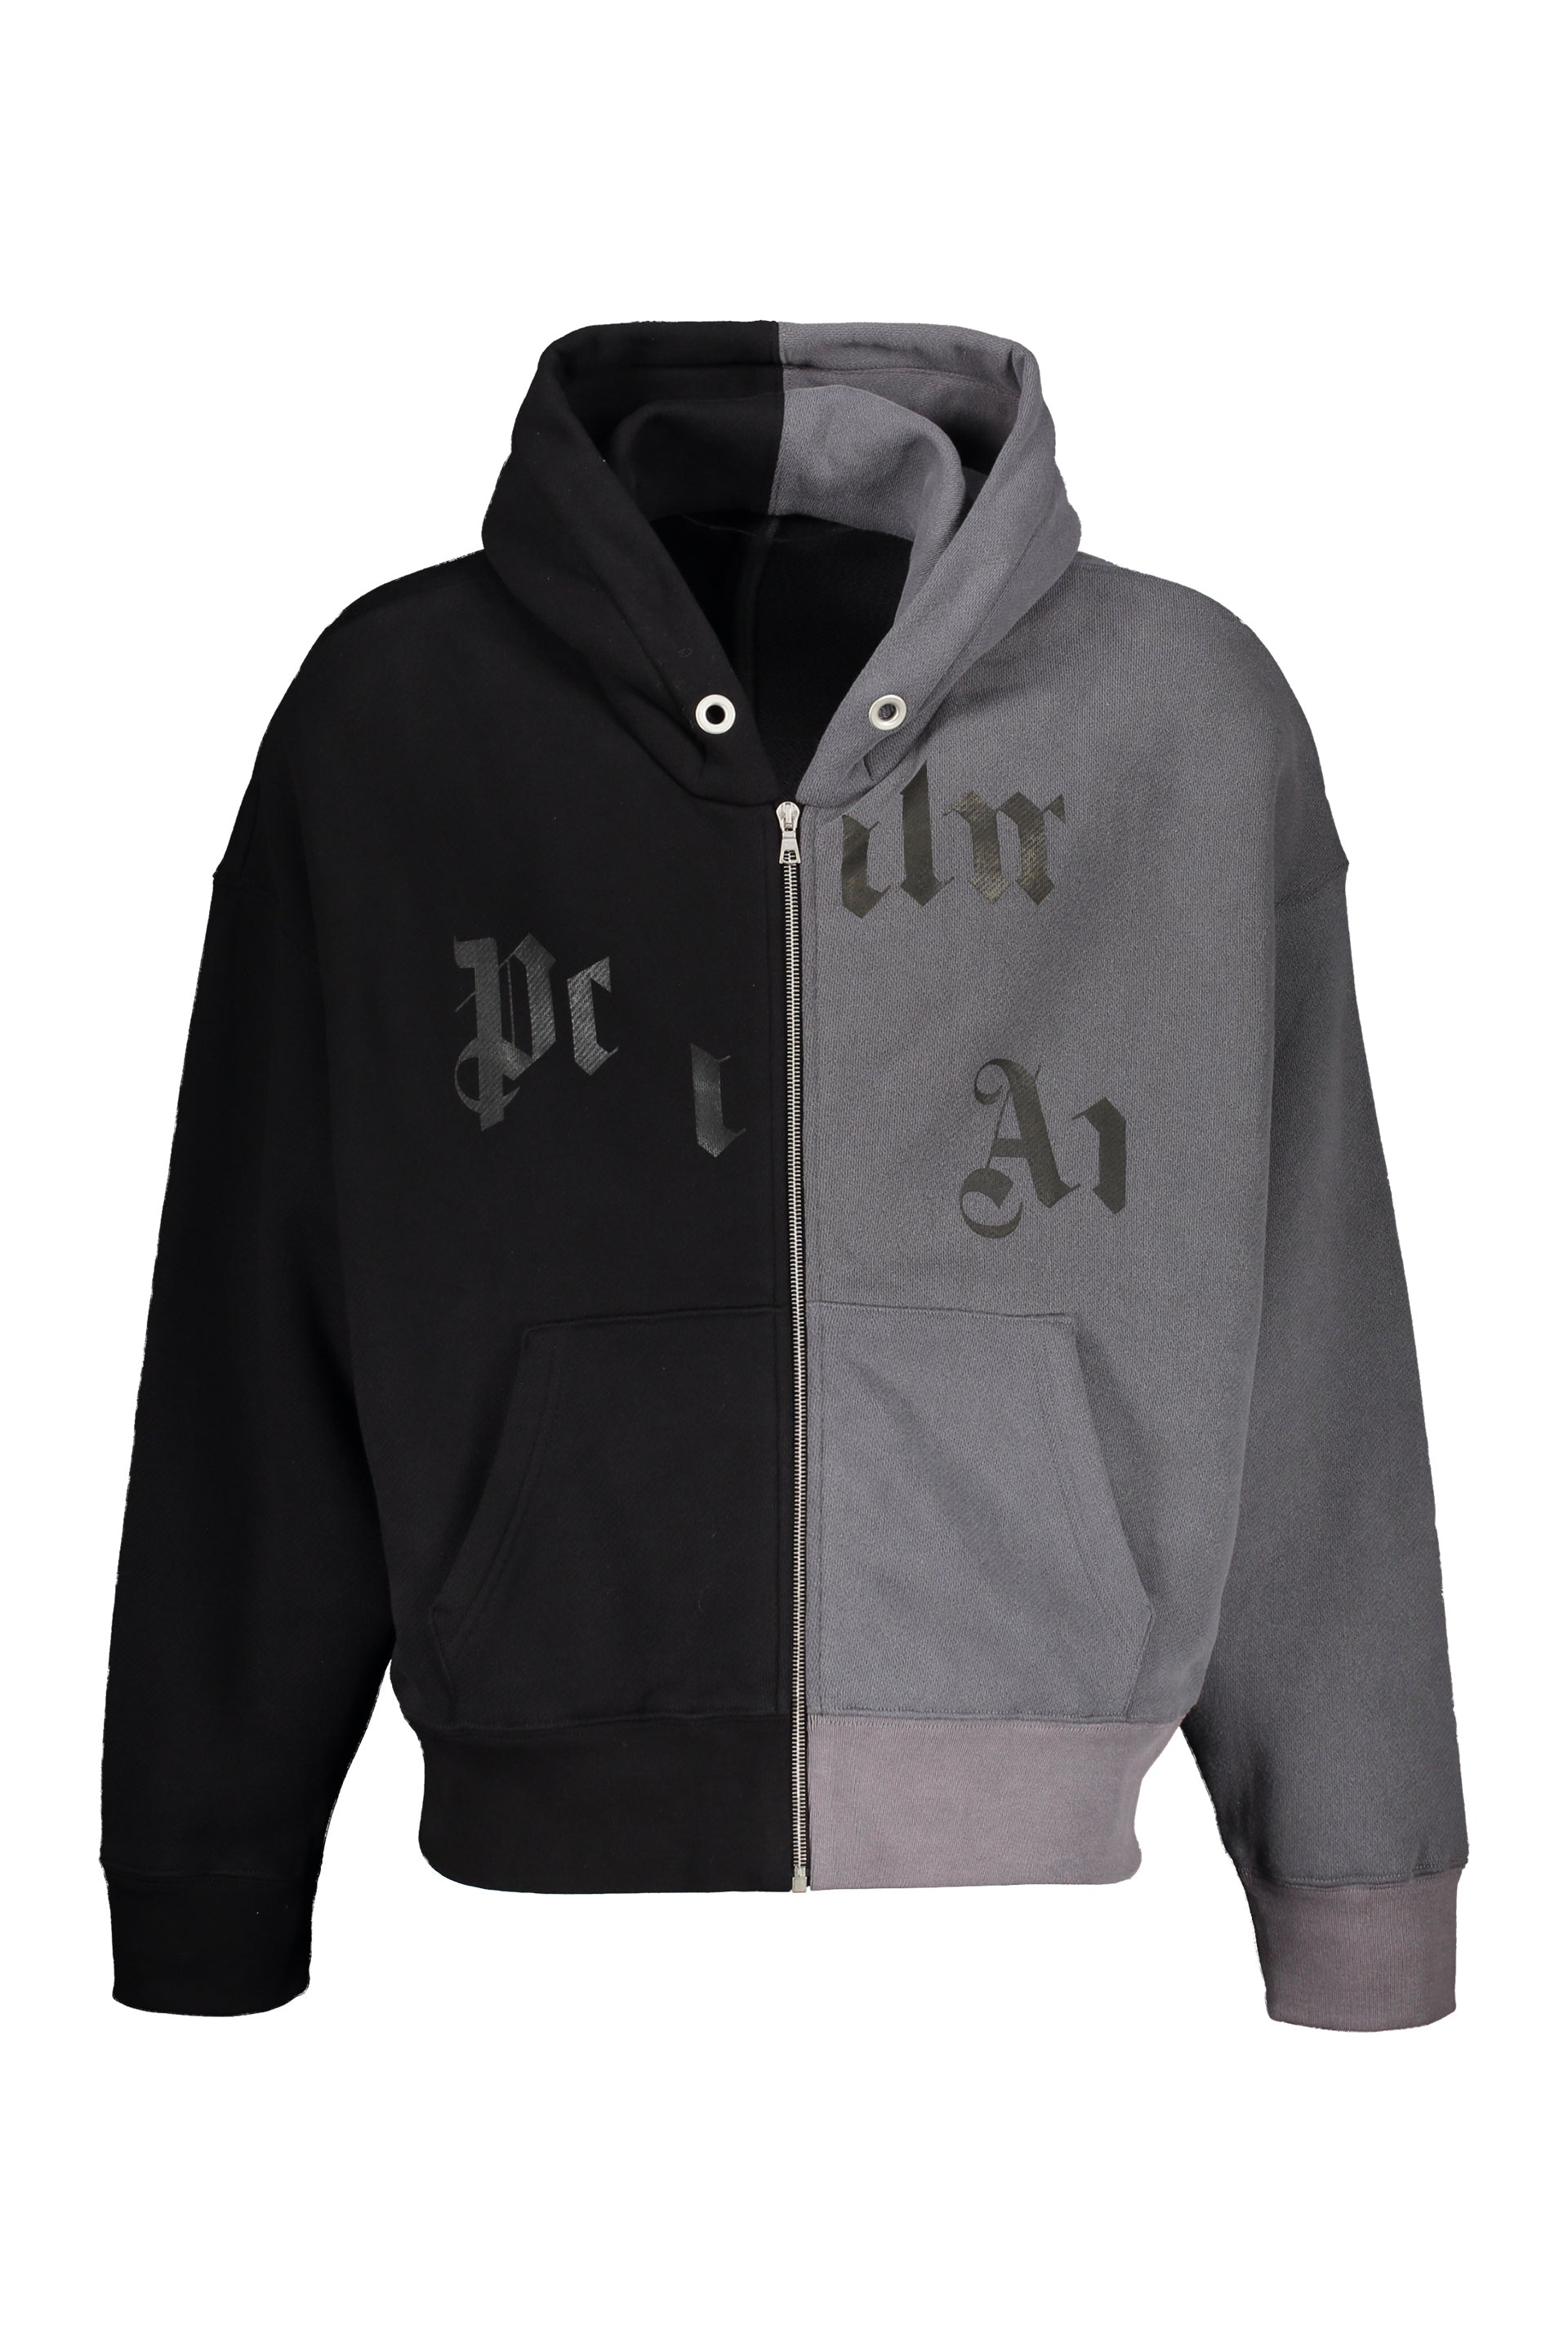 Palm-Angels-OUTLET-SALE-Full-zip-hoodie-Strick-L-ARCHIVE-COLLECTION.jpg